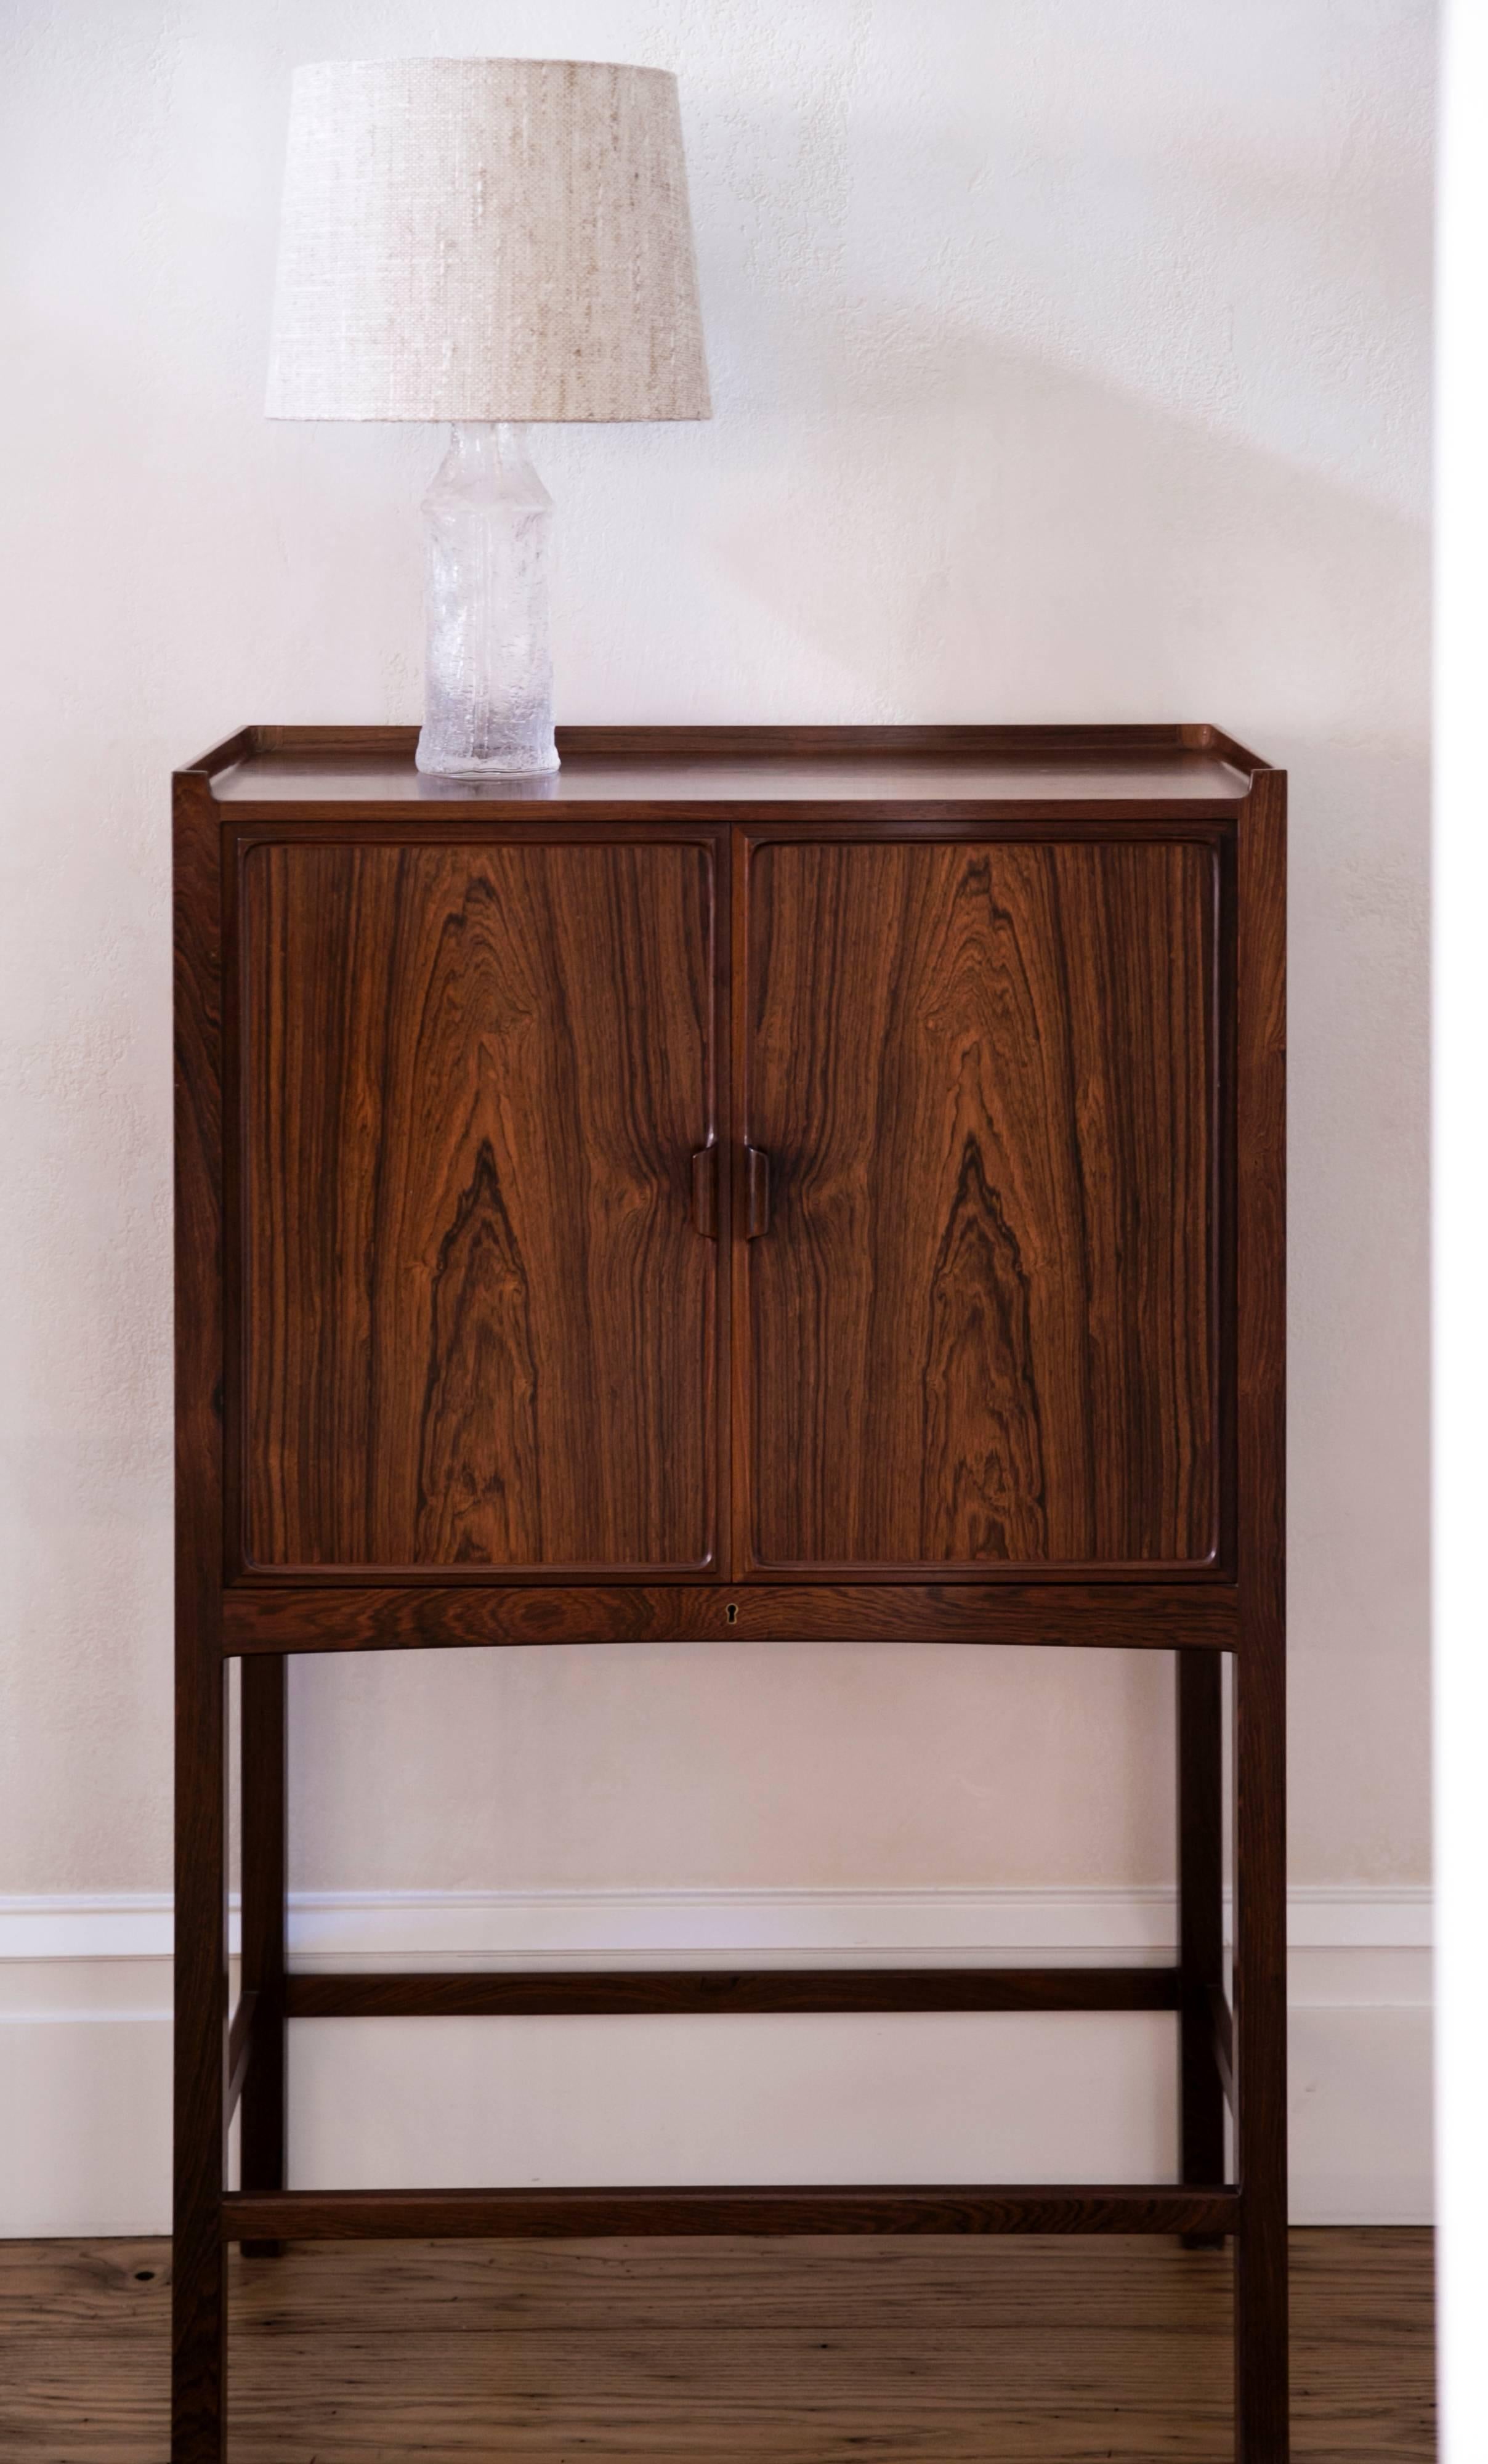 Small Freestanding Cabinet with Cedar Wood Interior by Ludvig Pontoppidan In Excellent Condition For Sale In New York, NY